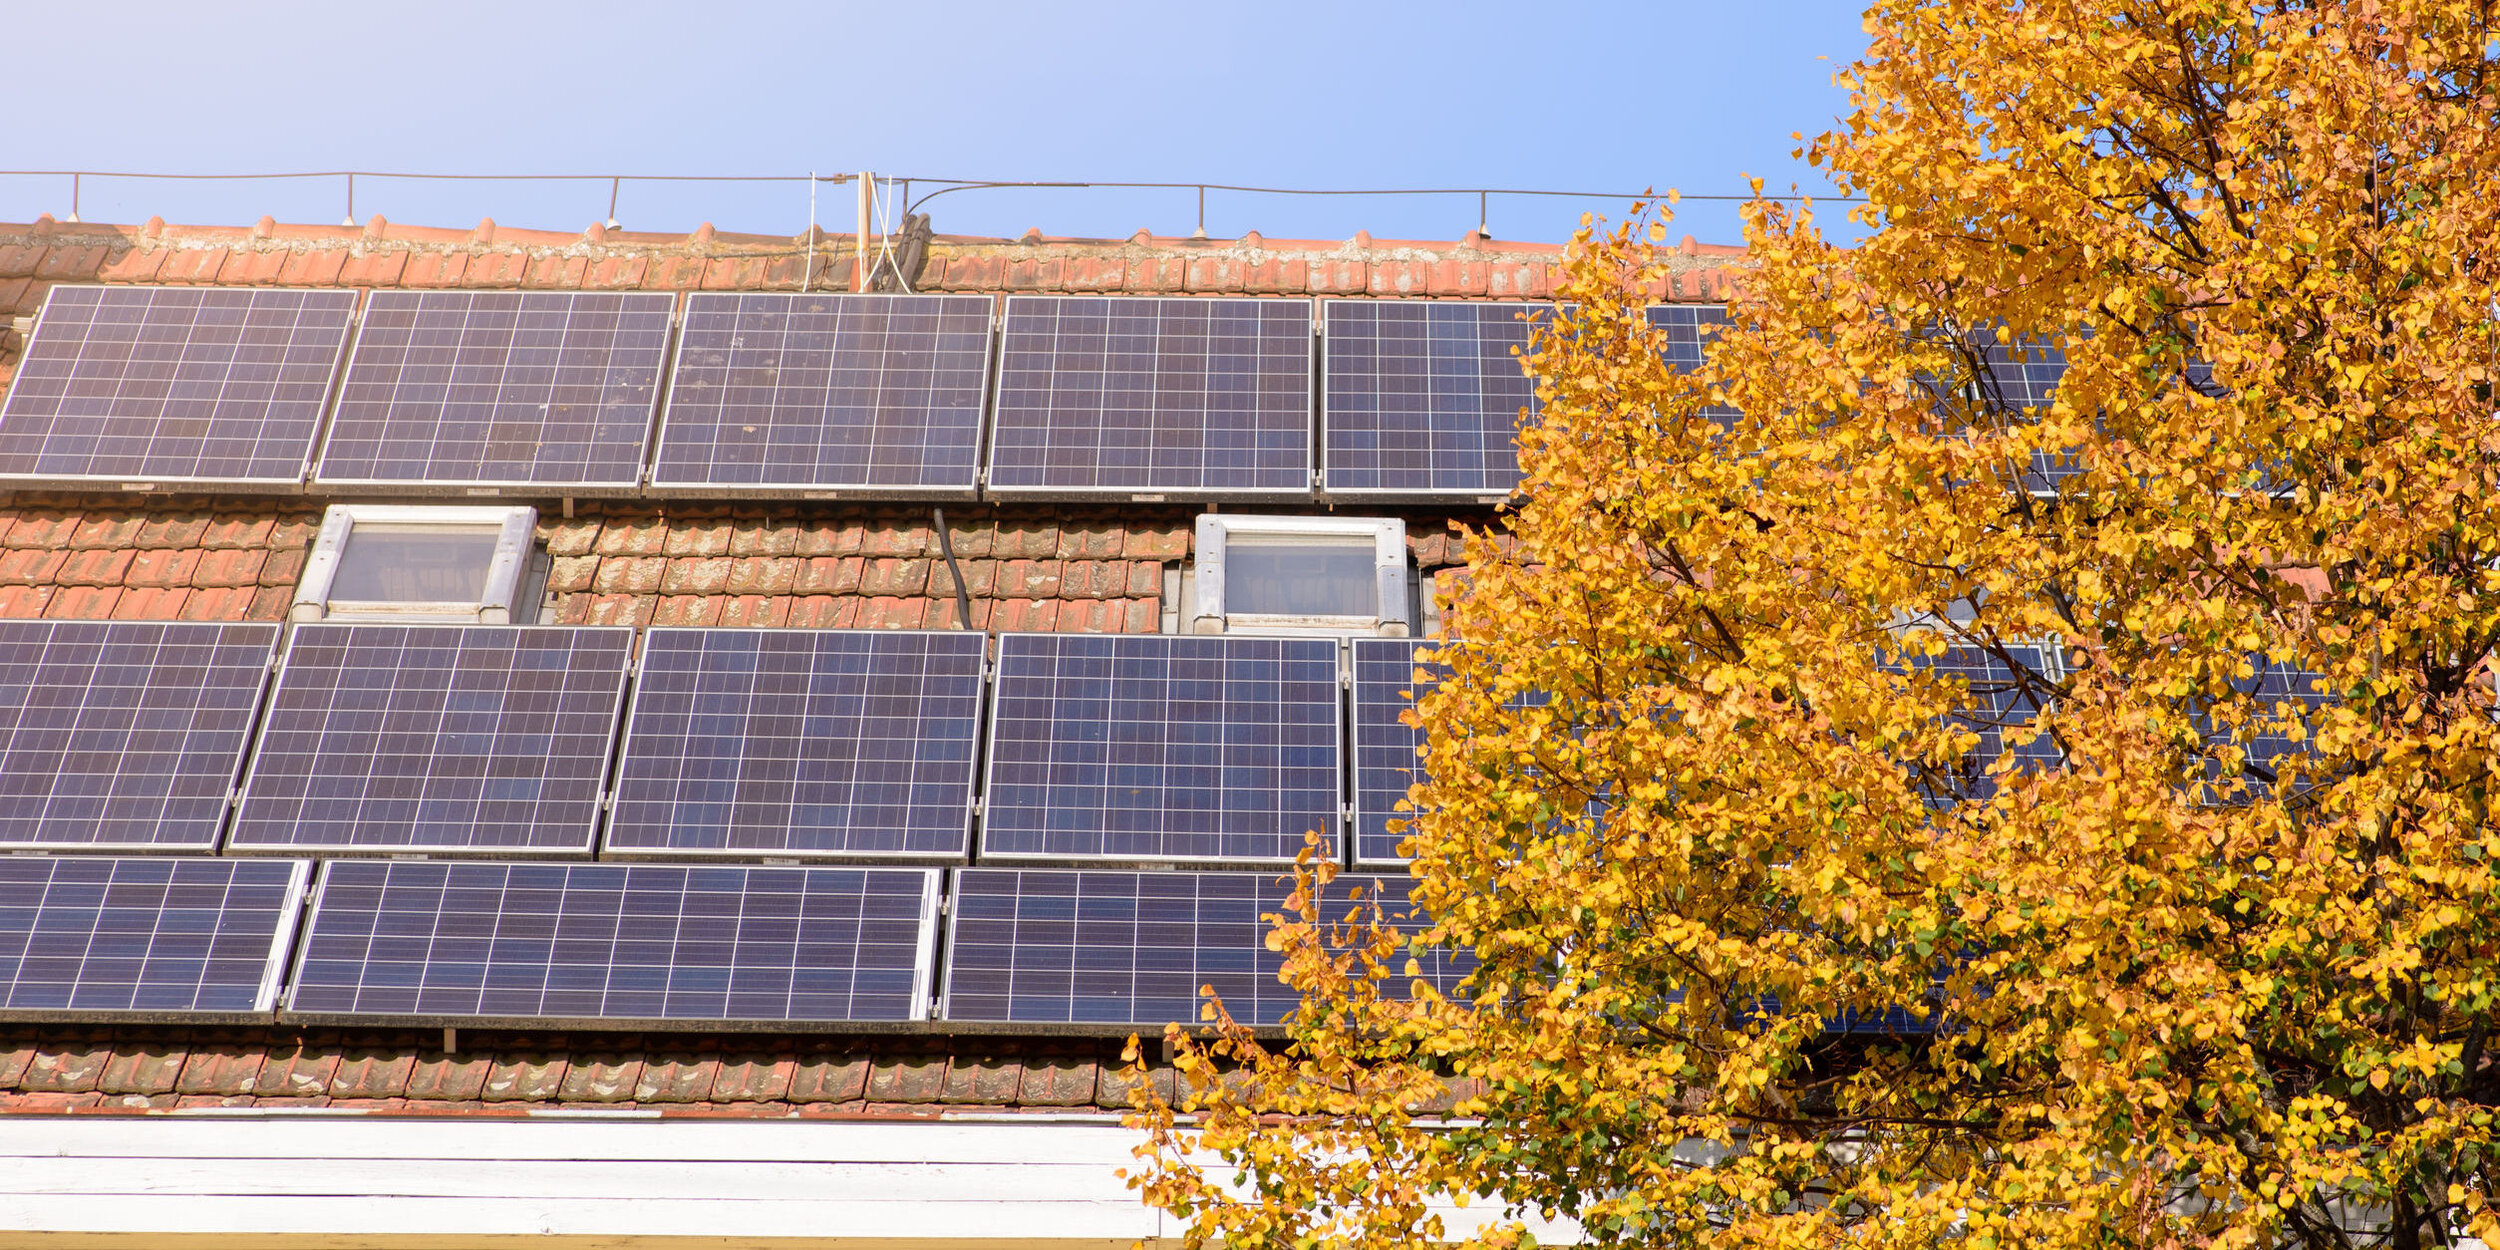 3 Reasons to Contact Solar Panel Installation Companies in Los Angeles This Fall